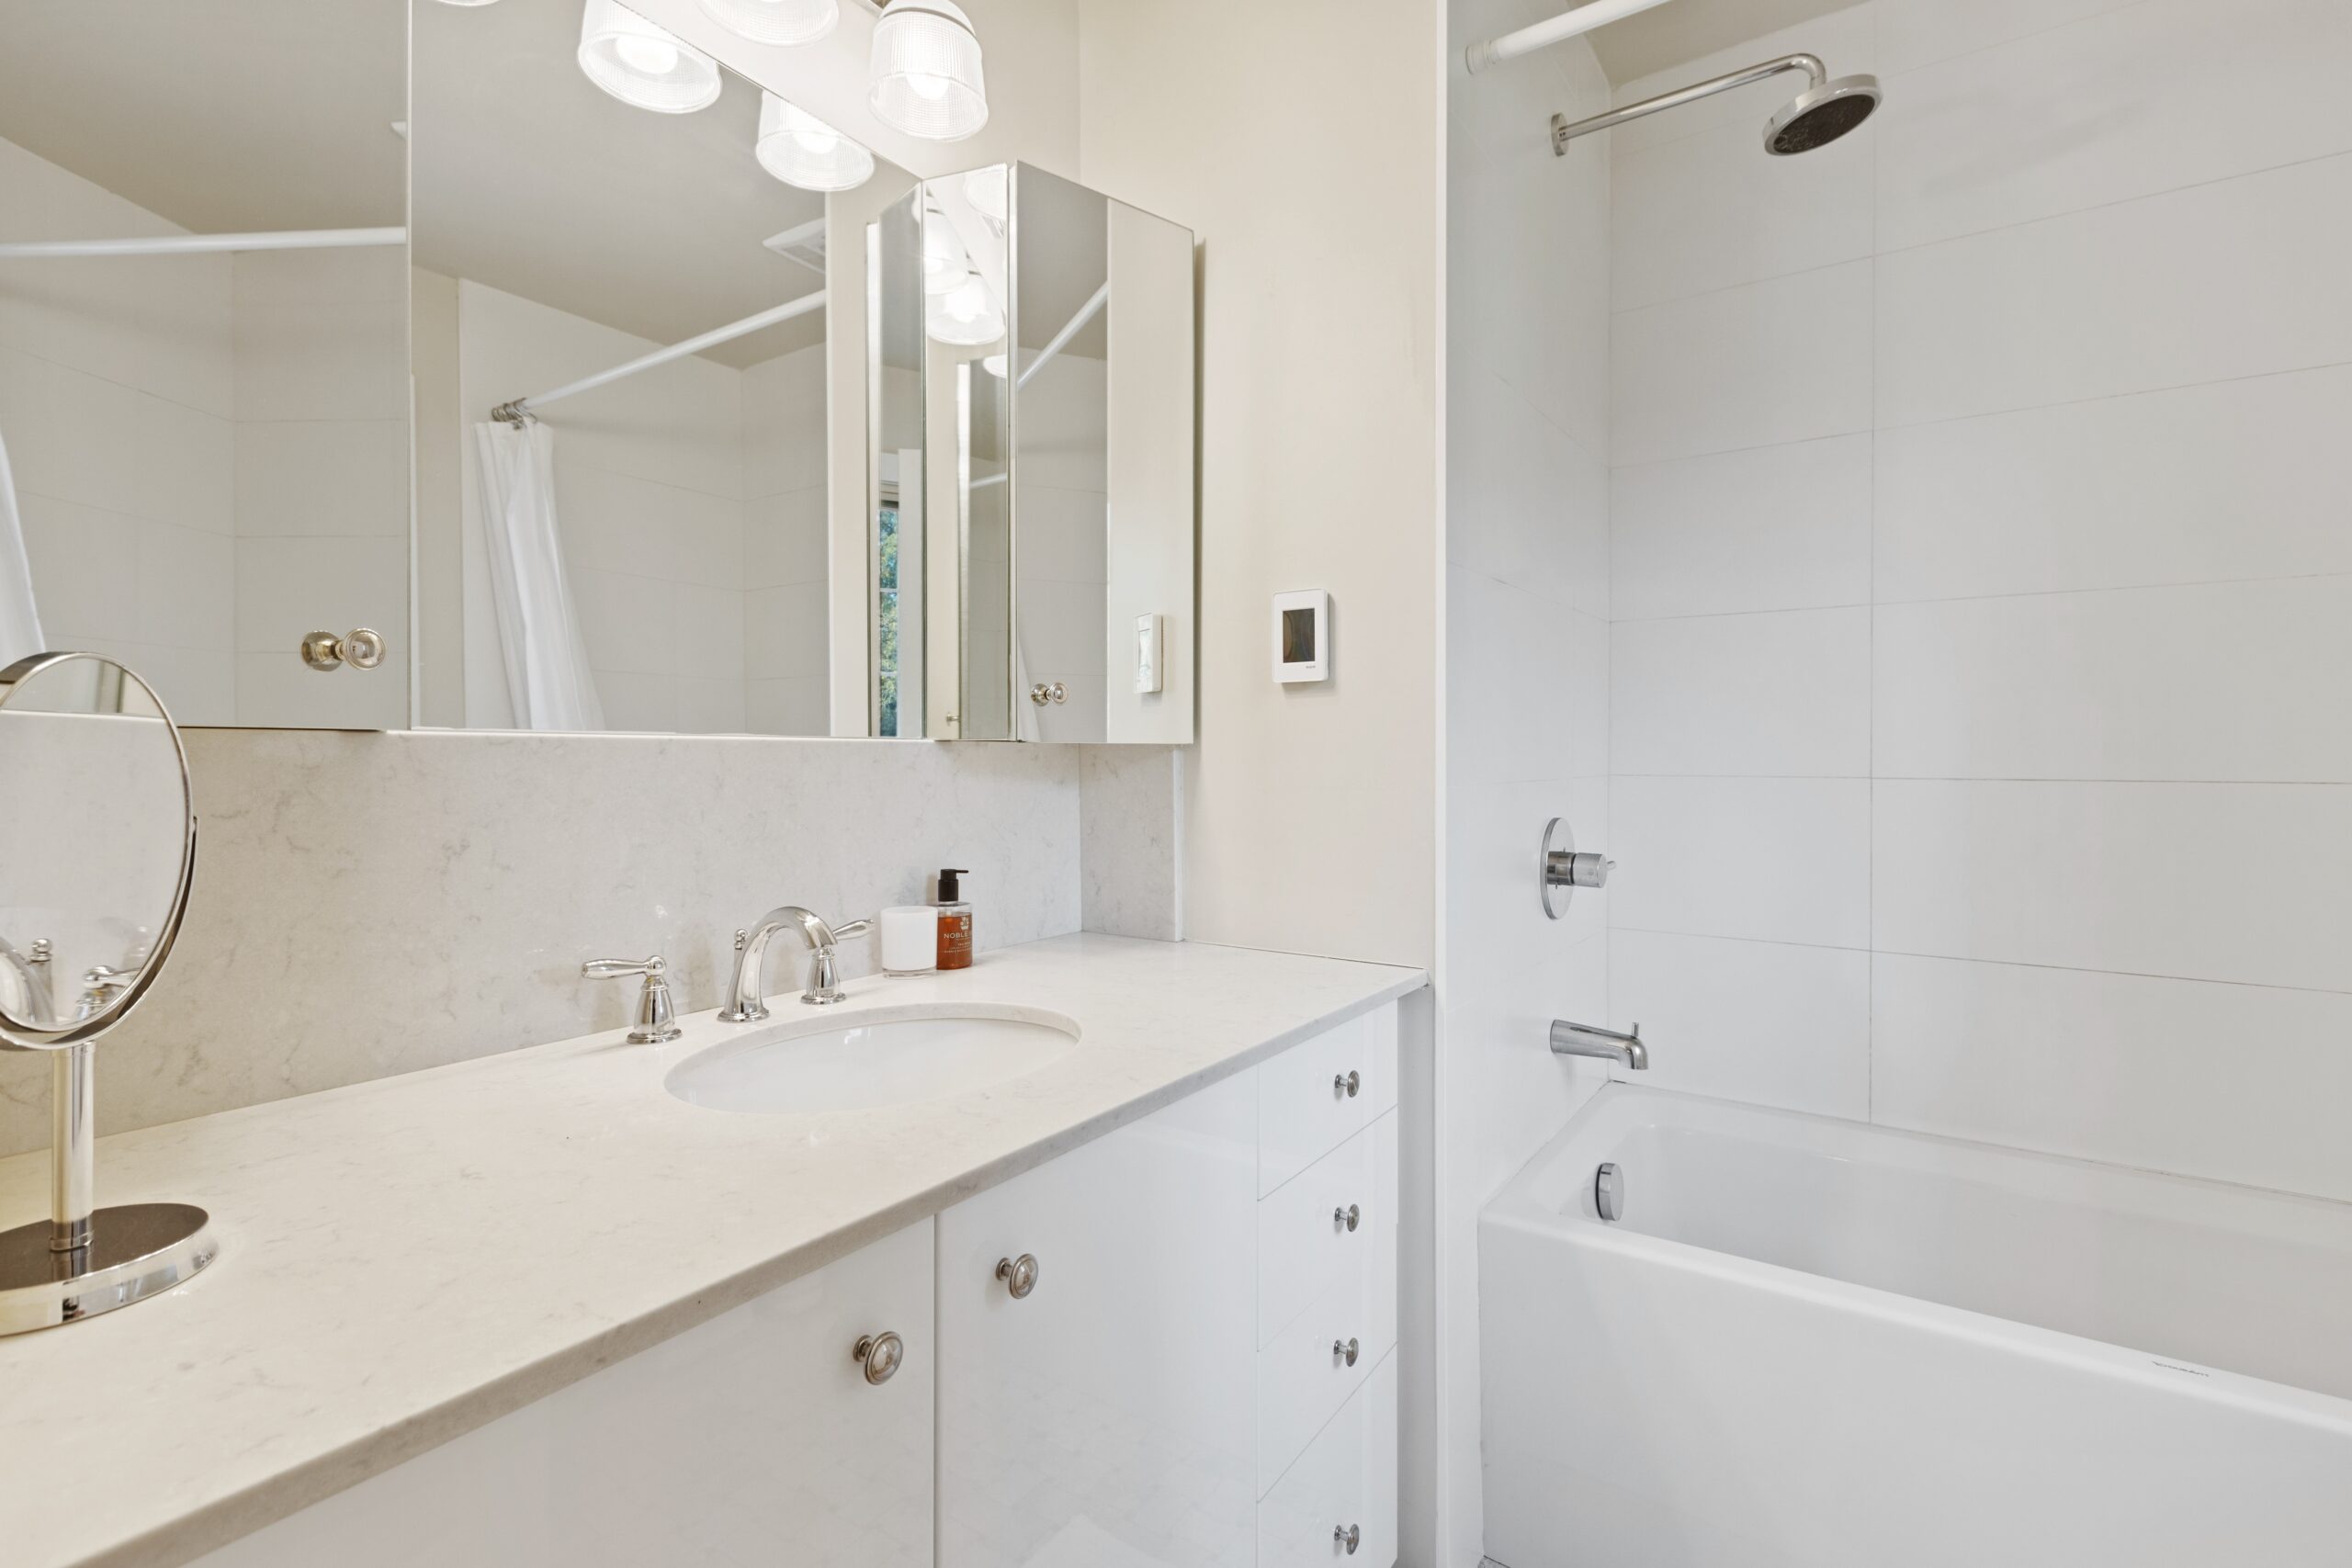 Key Questions to Ask before Hiring a Bathroom Remodeler